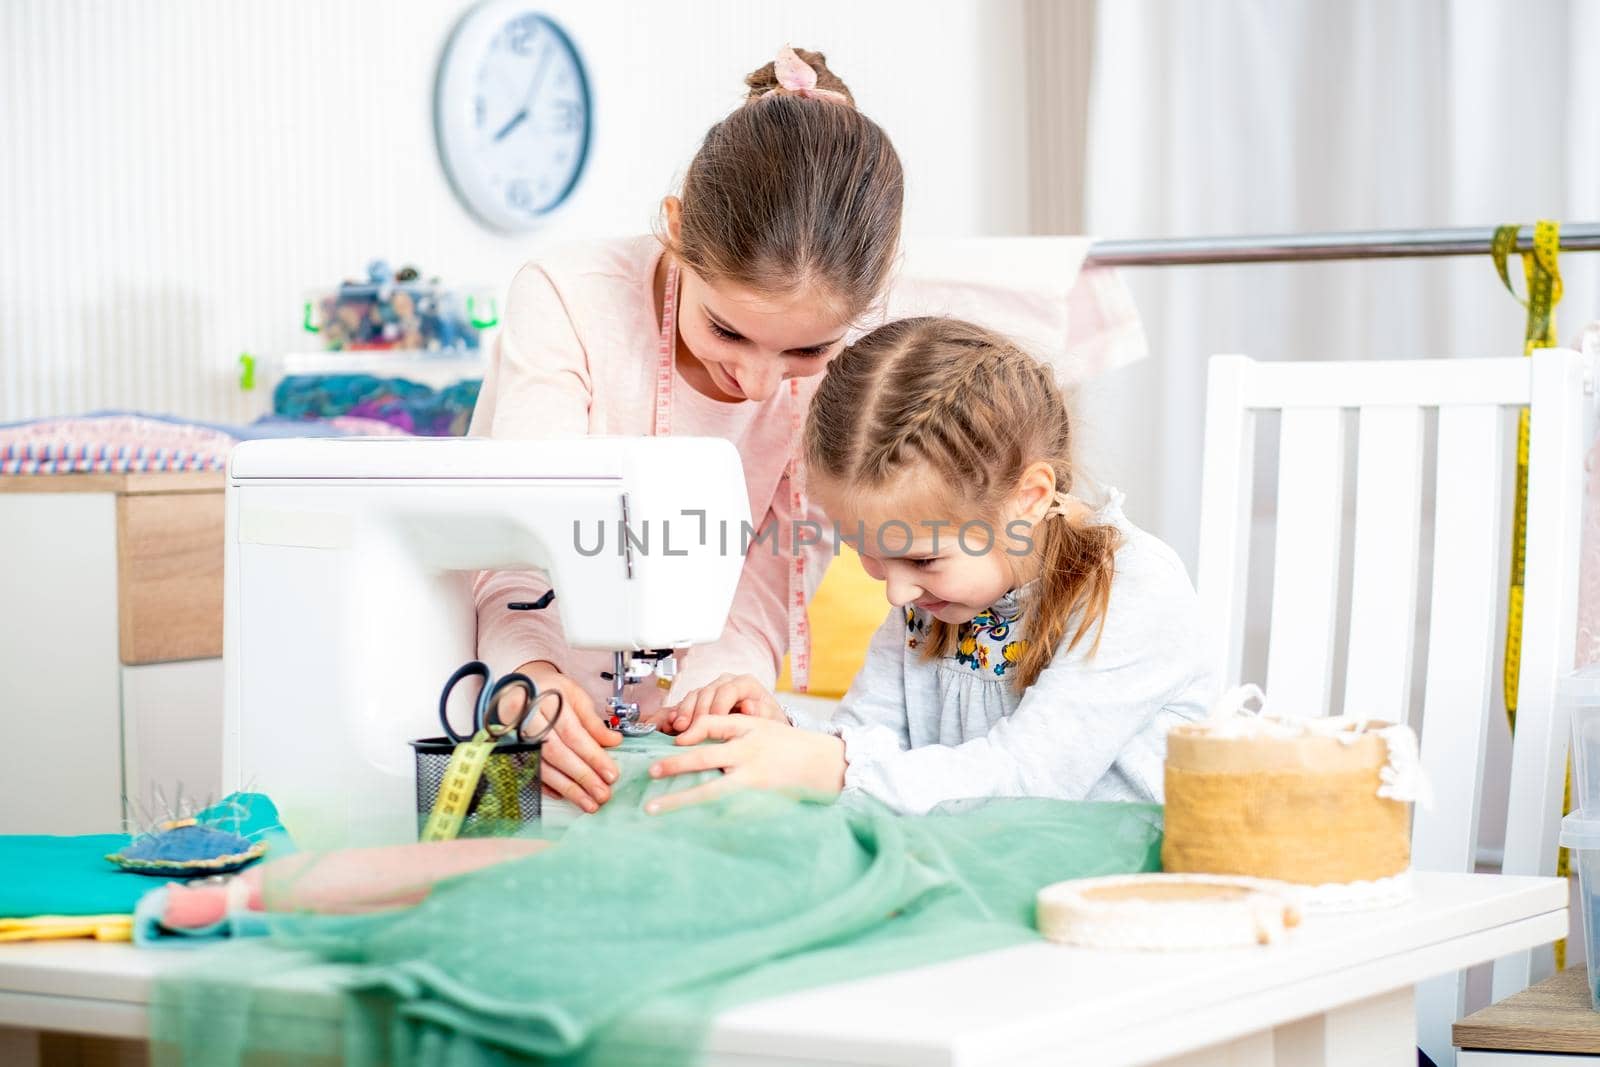 Smiling happy sister teaches a little girl to sew on a sewing machine by herself